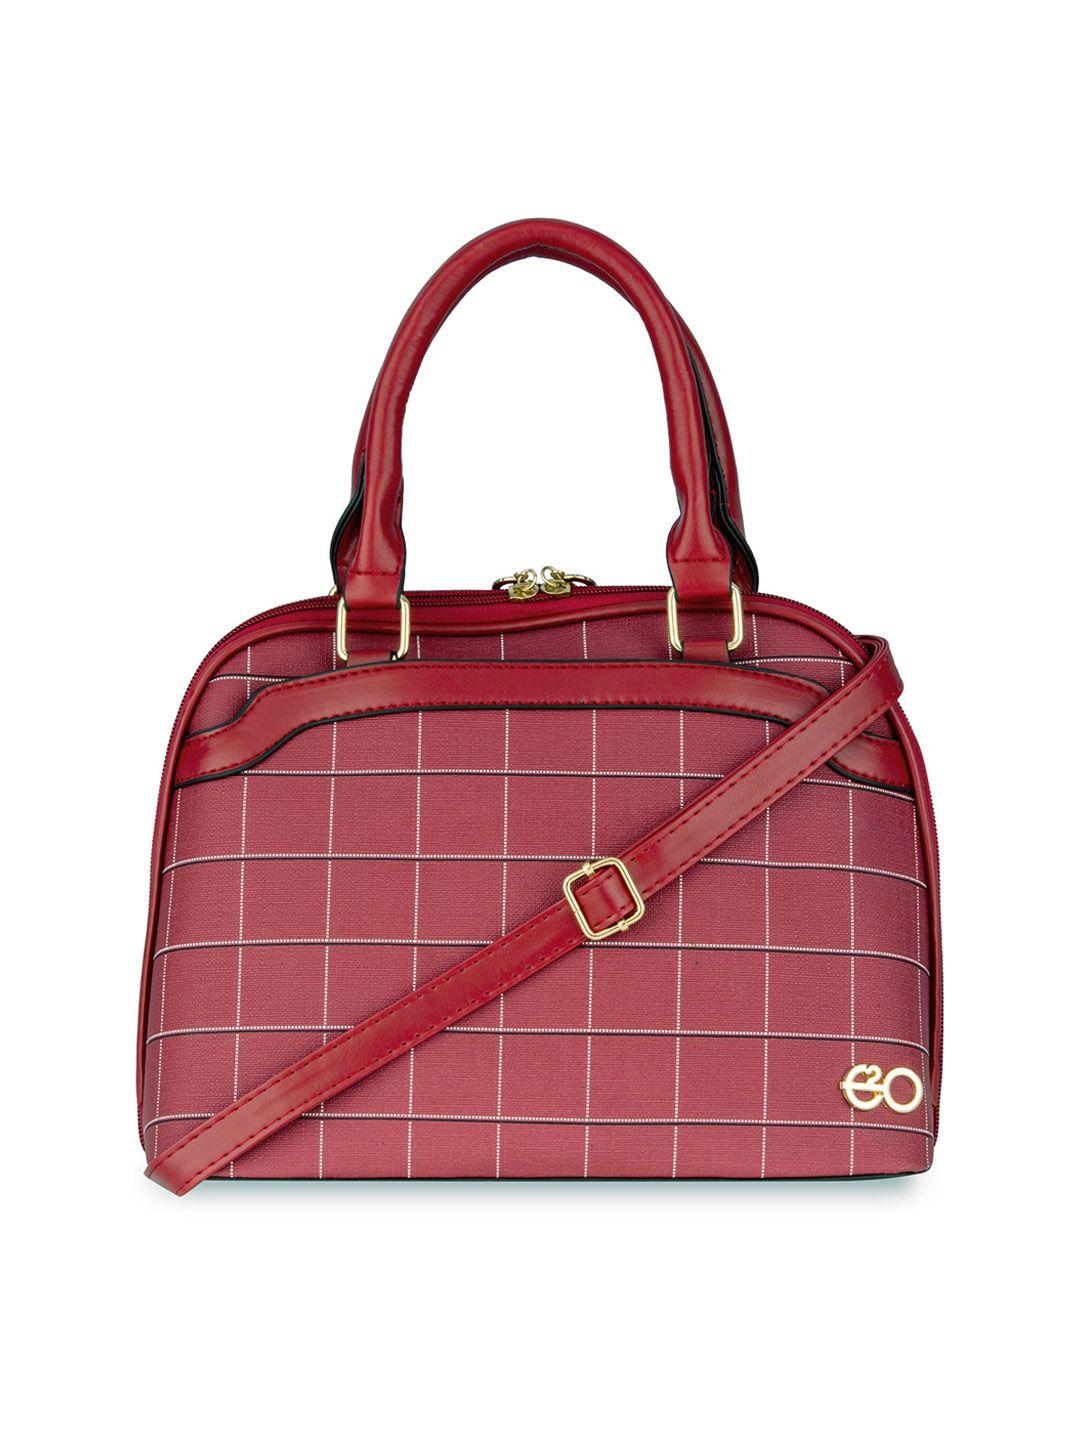 e2o geometric checked pu structured handheld bag with quilted